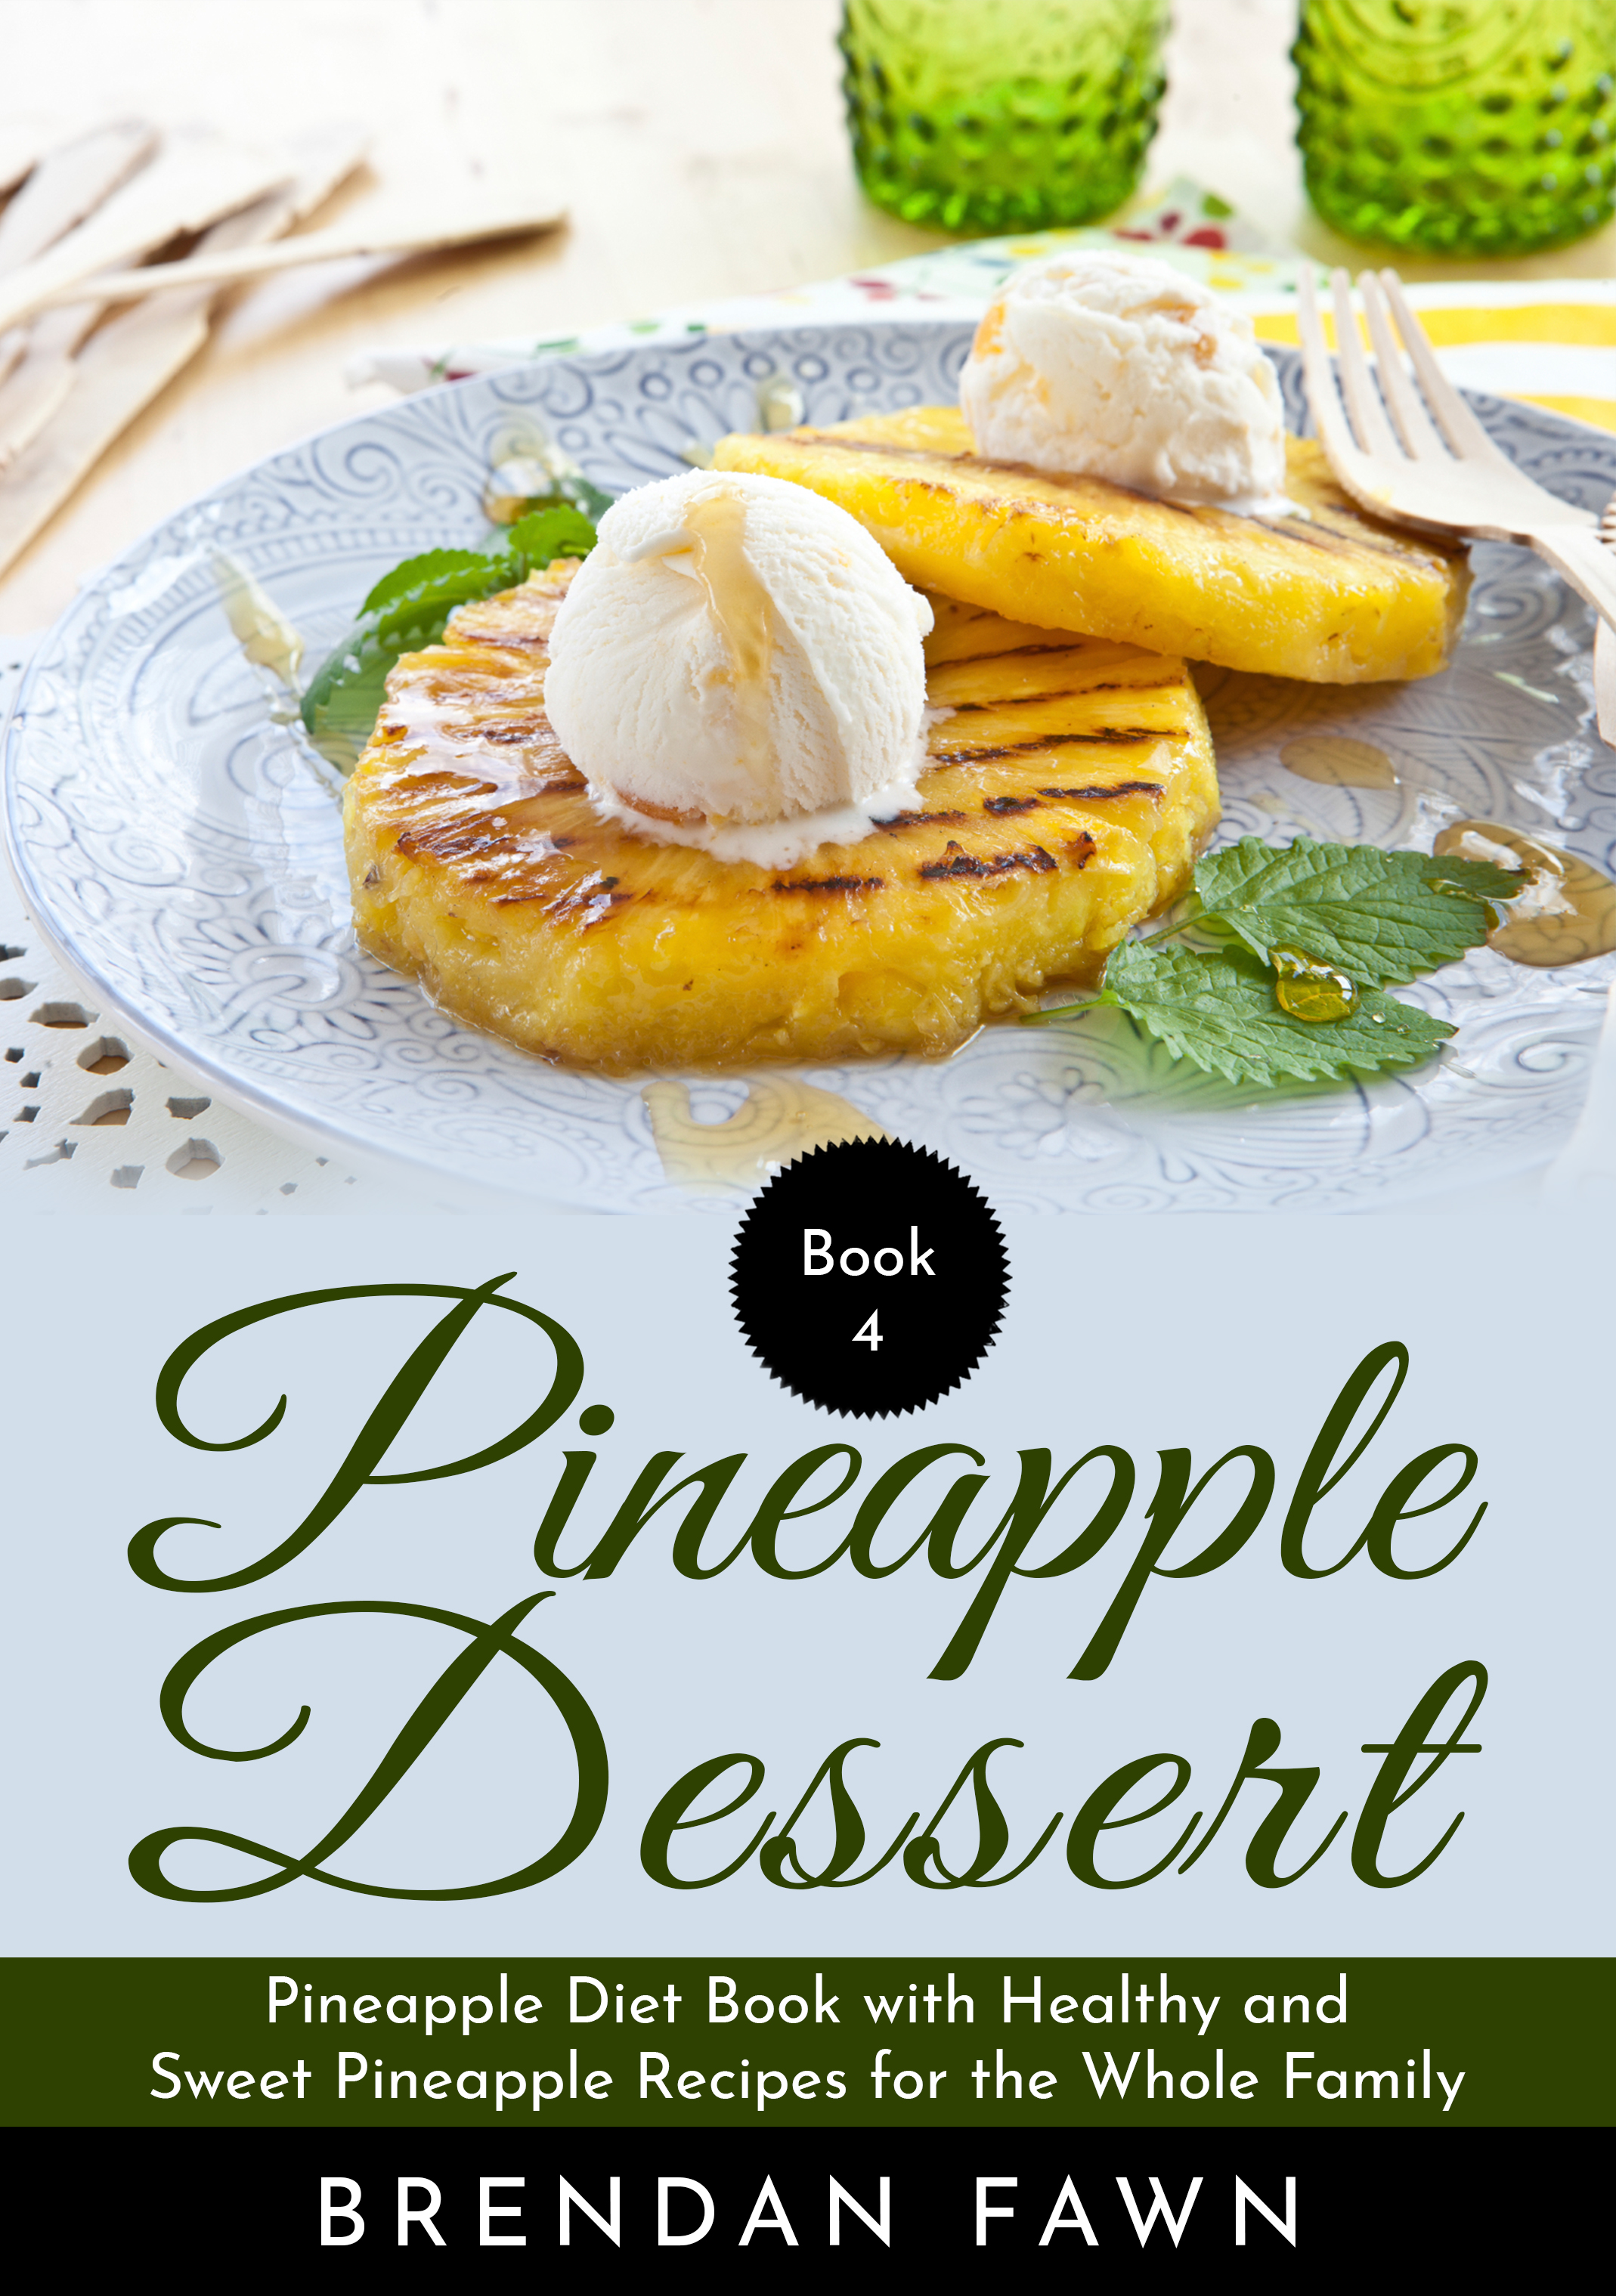 FREE: Pineapple Dessert: Pineapple Diet Book with Healthy and Sweet Pineapple Recipes for the Whole Family by Brendan Fawn